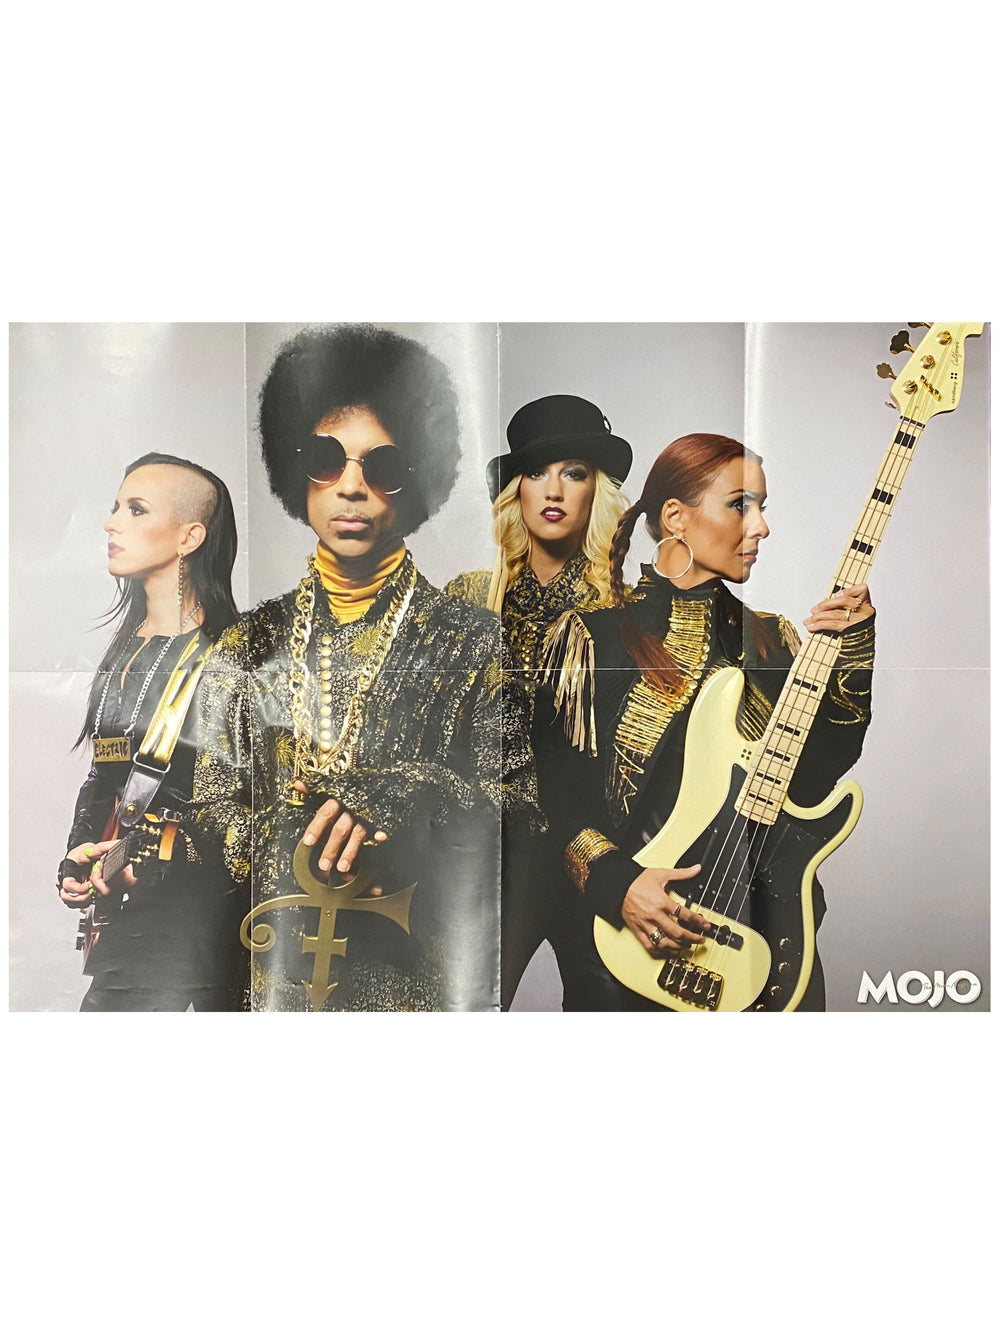 Prince 3RDEYEGIRL MOJO Magazine April 2014 Cover And 16 Page Article AND POSTER